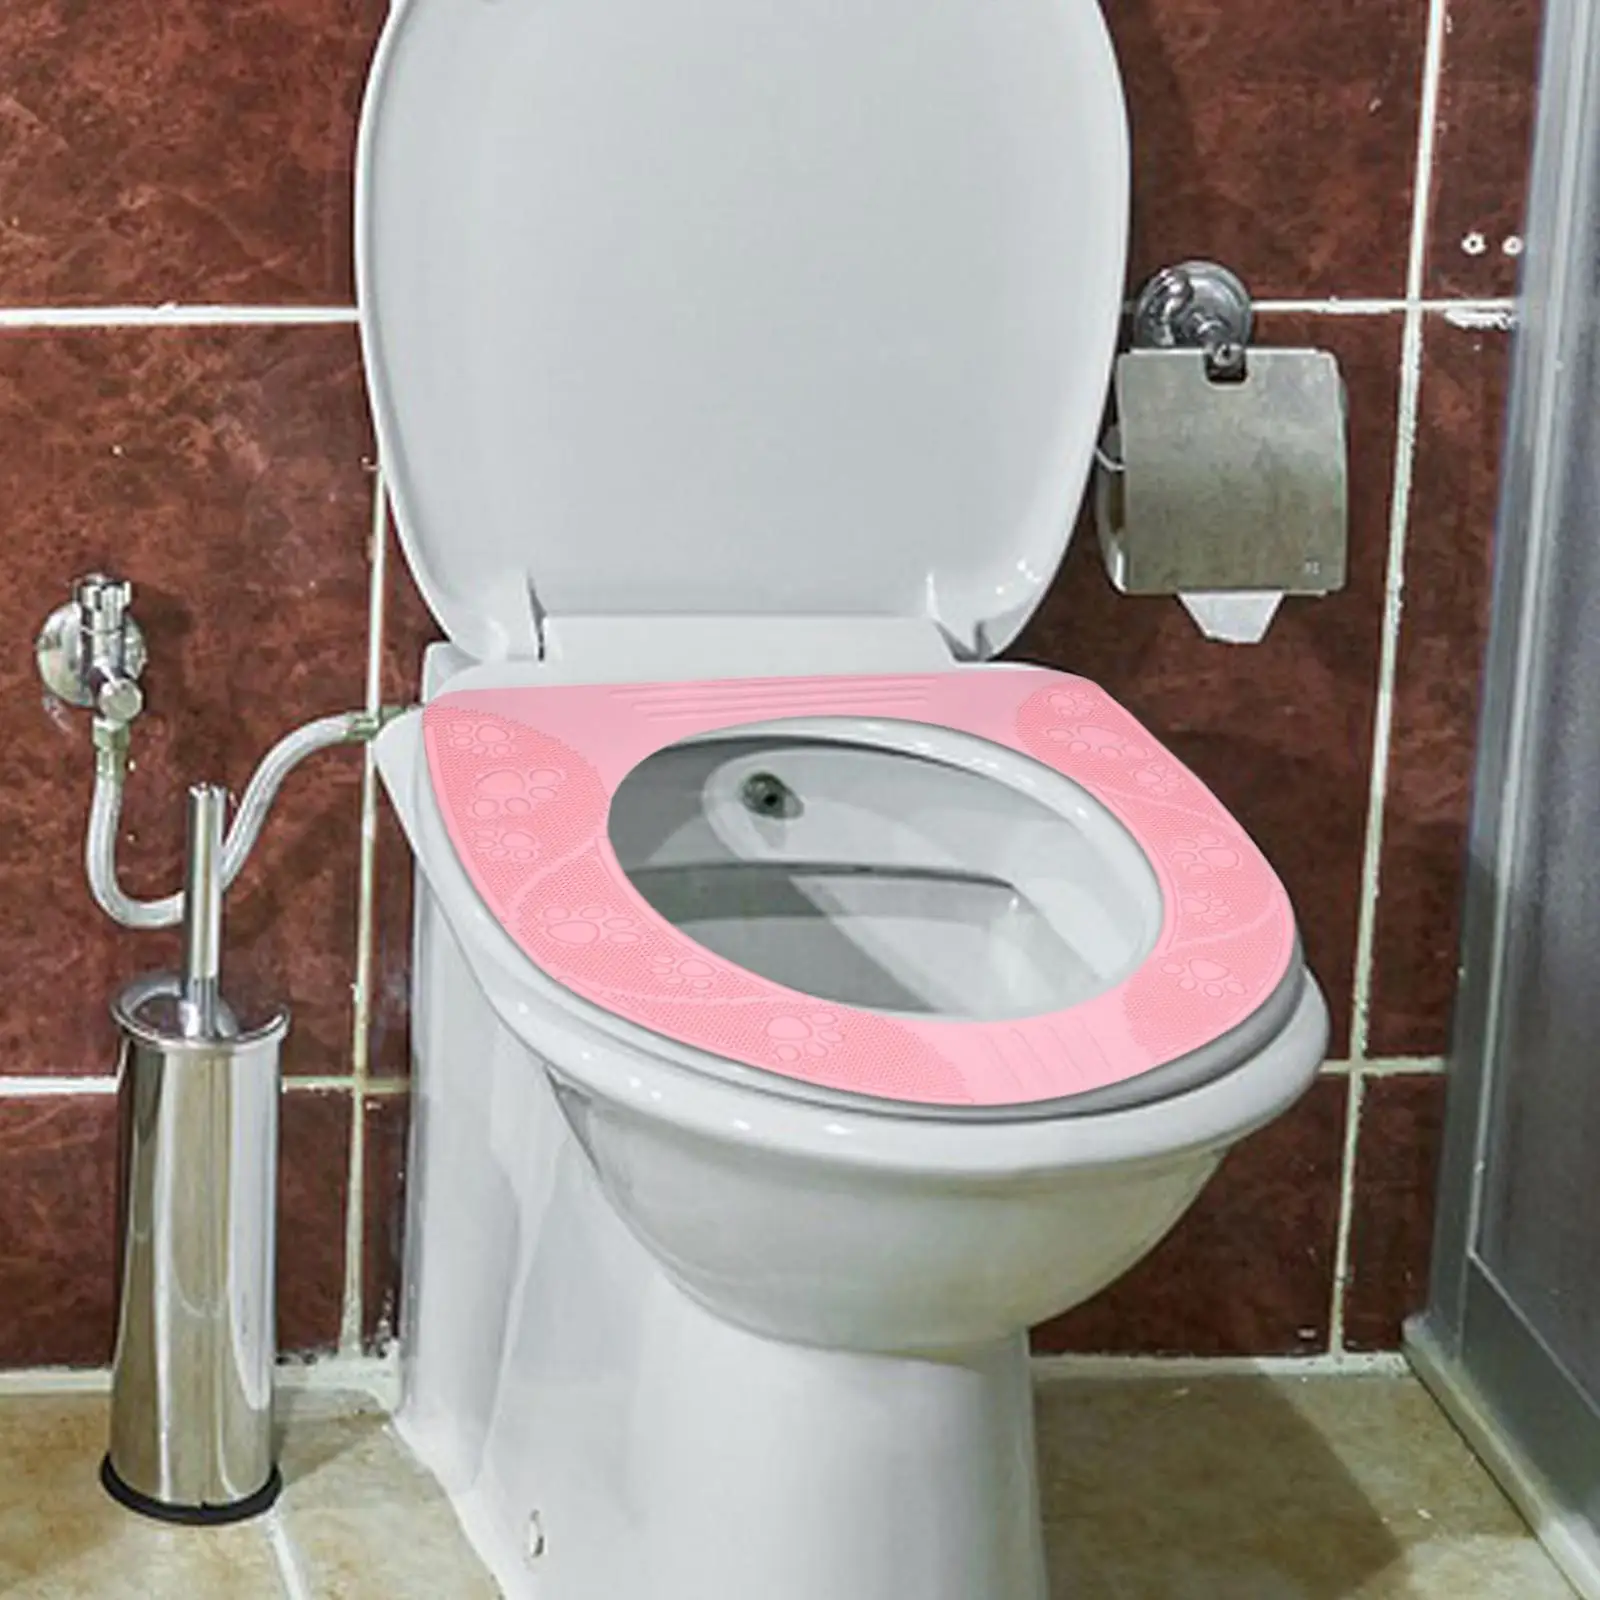 Portable Toilet Seat Cover Four Seasons Universal Bathroom Closestool Cover Toilet Seat Mat Toilet Seat Cushion for Home